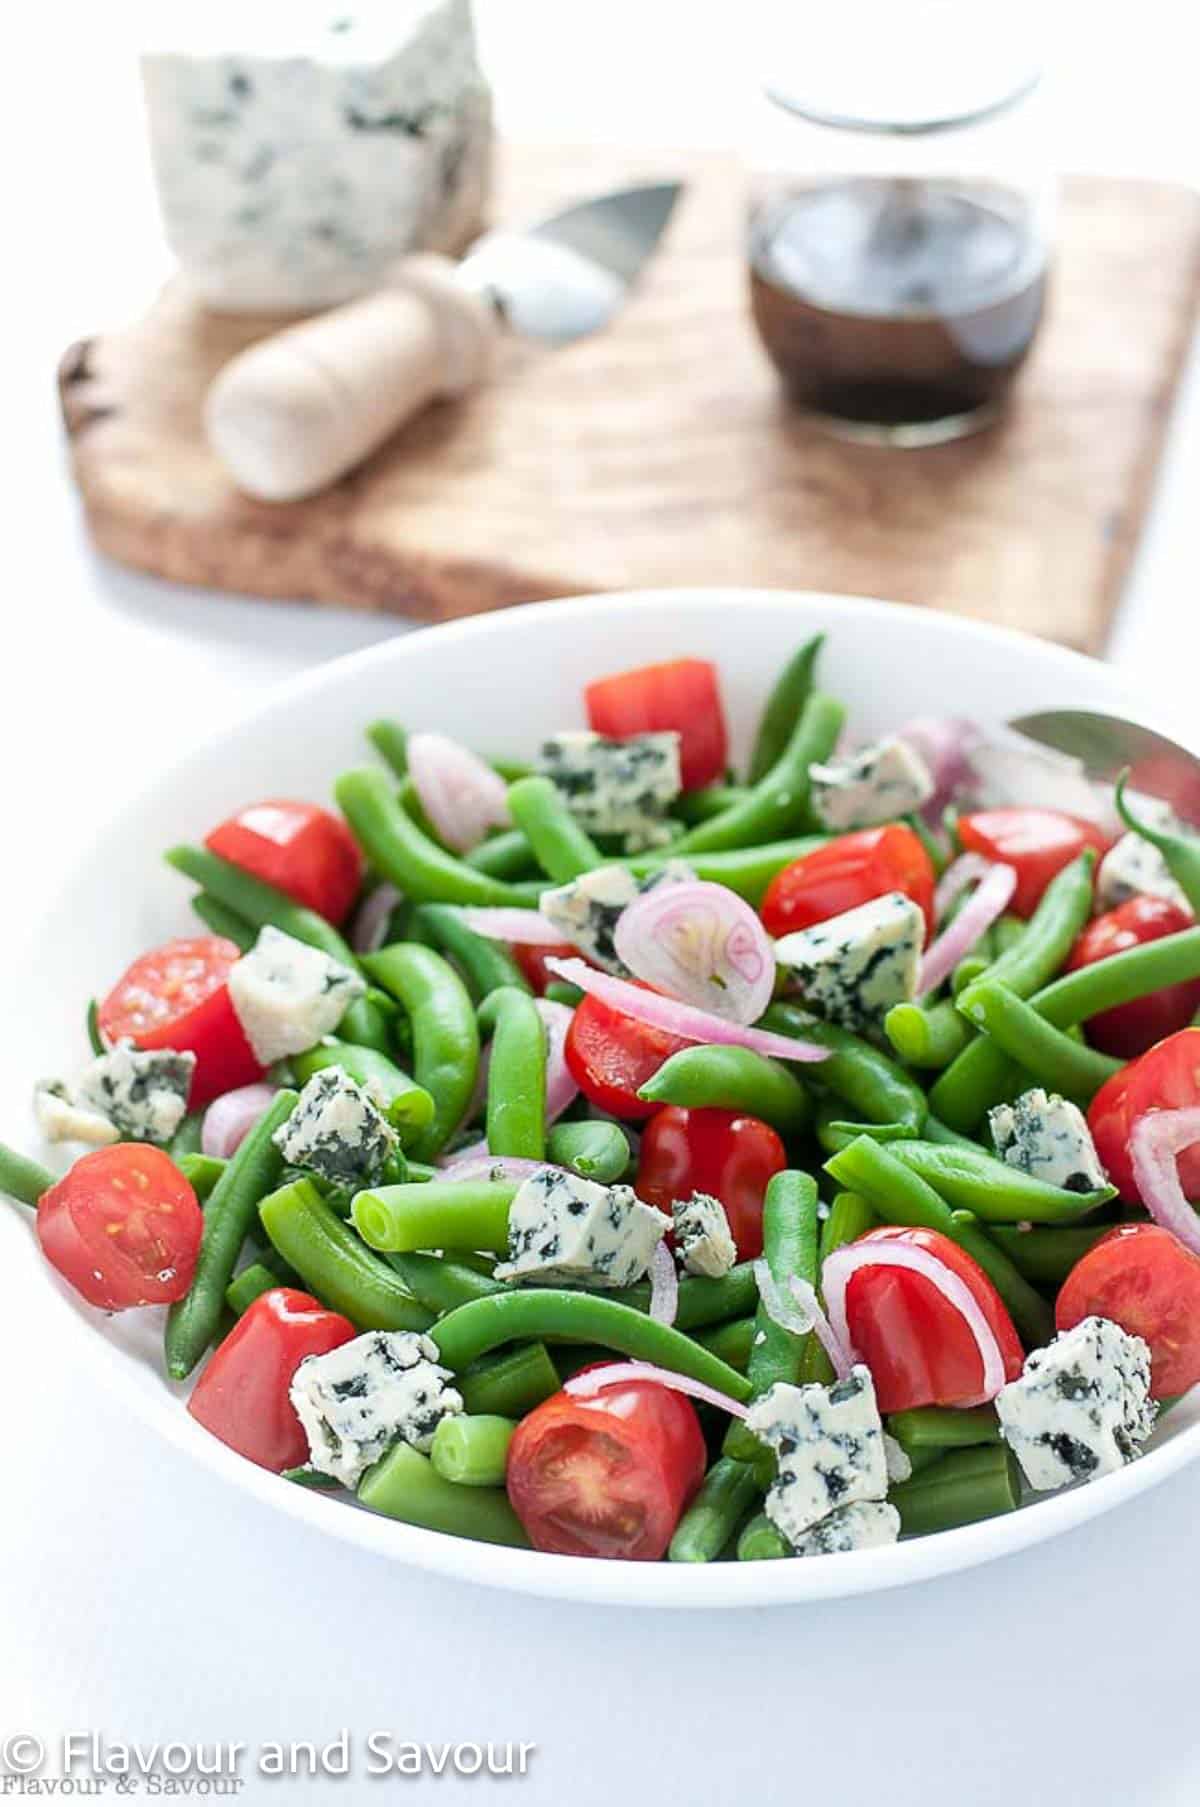 A bowl of salad with green beans, blue cheese, red onions and cherry tomatoes.